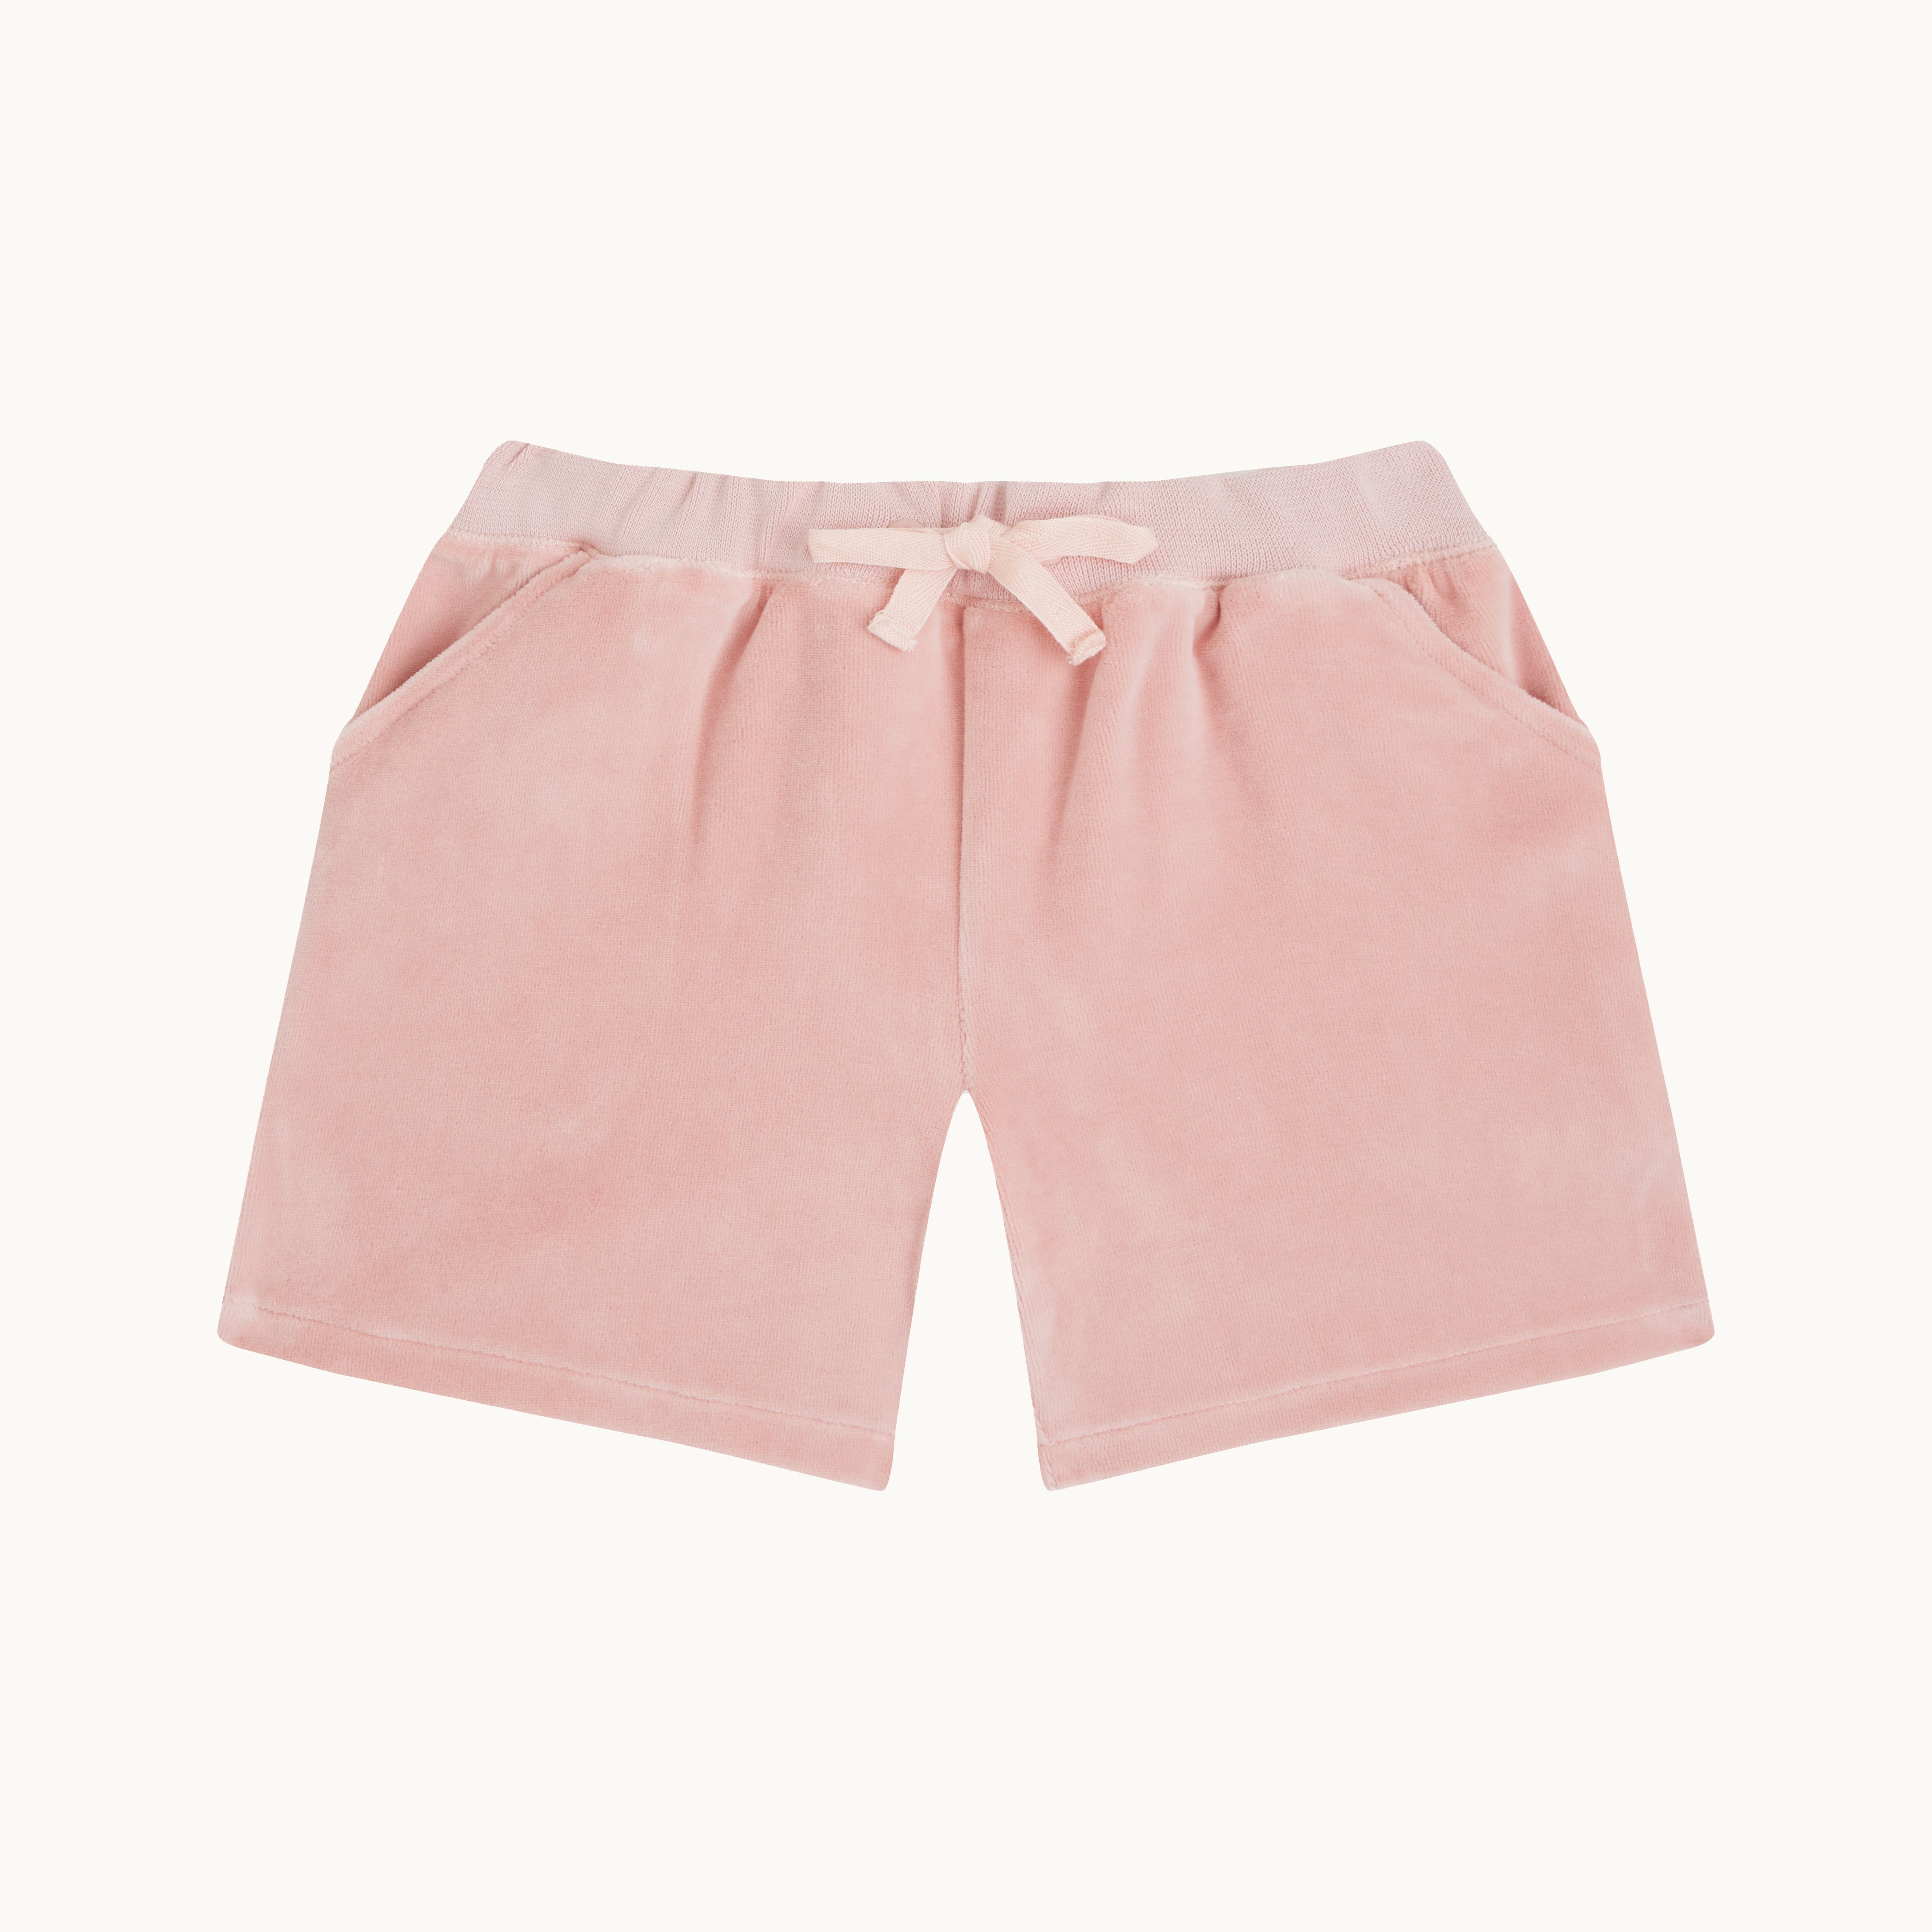 Velour Angel Wing Shorts - Child Pink